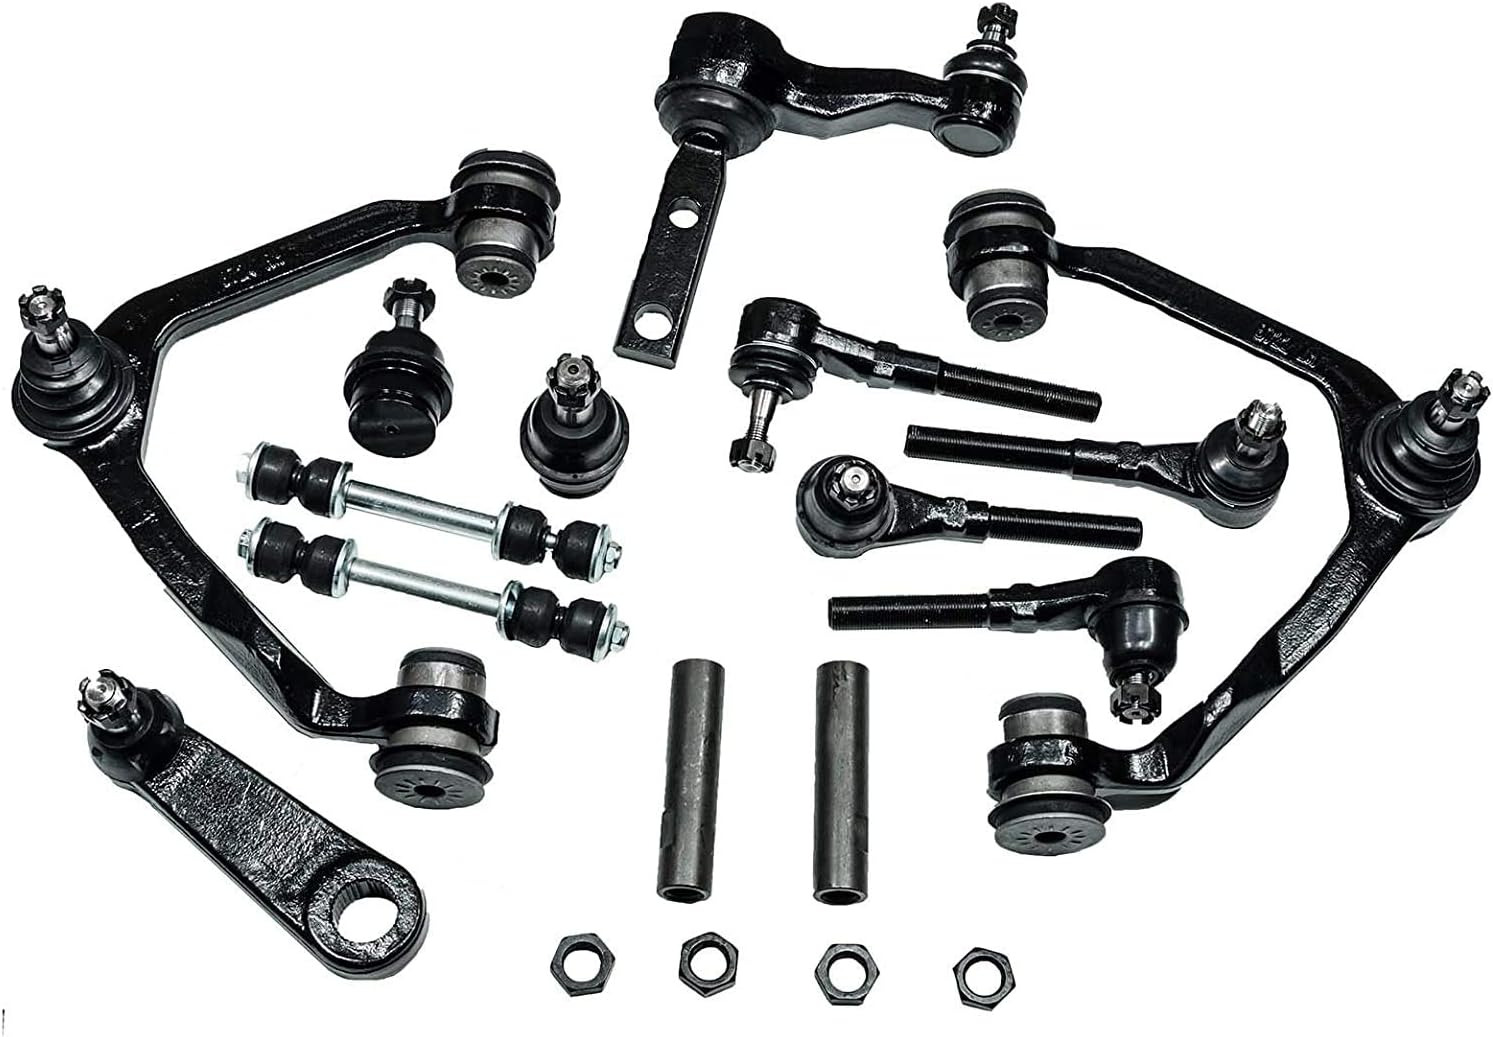 14-Piece 4X4 Only Front Suspension Kit, Upper Control Arms, Lower Ball Joints, I